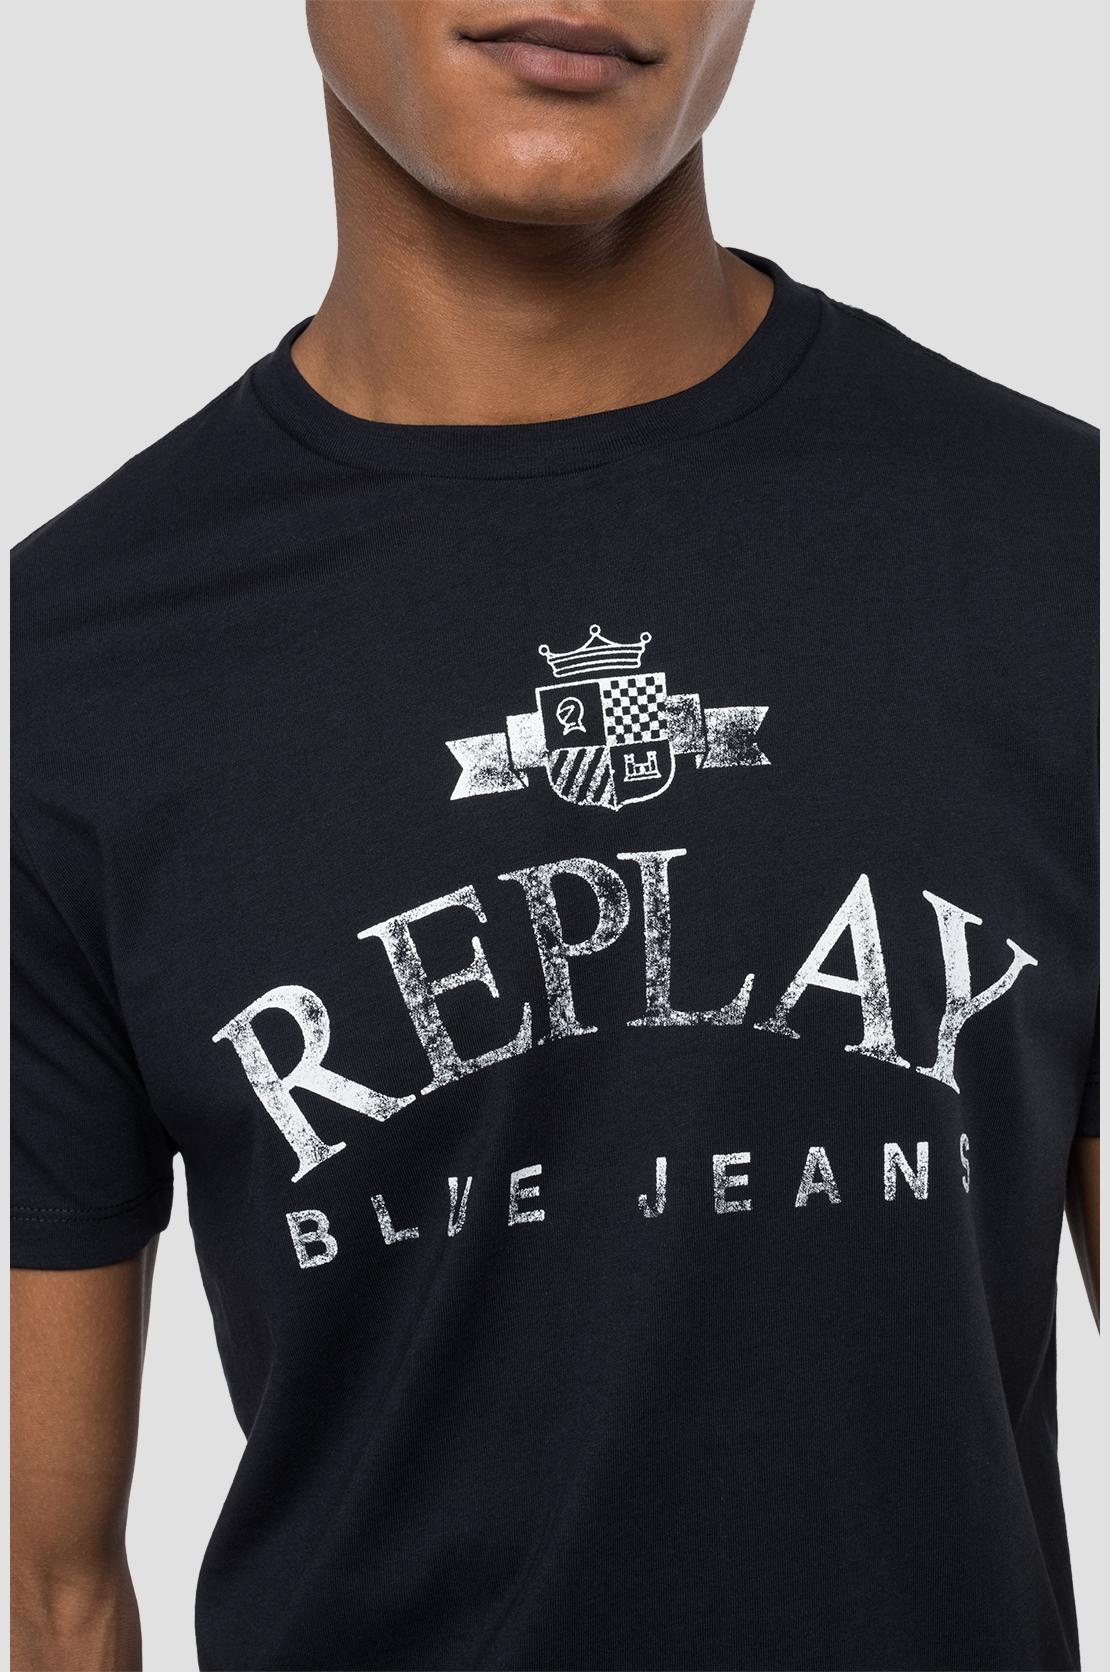 The Organic T-Shirt Cotton Replay - Solid Colour Black (M3141) - 515